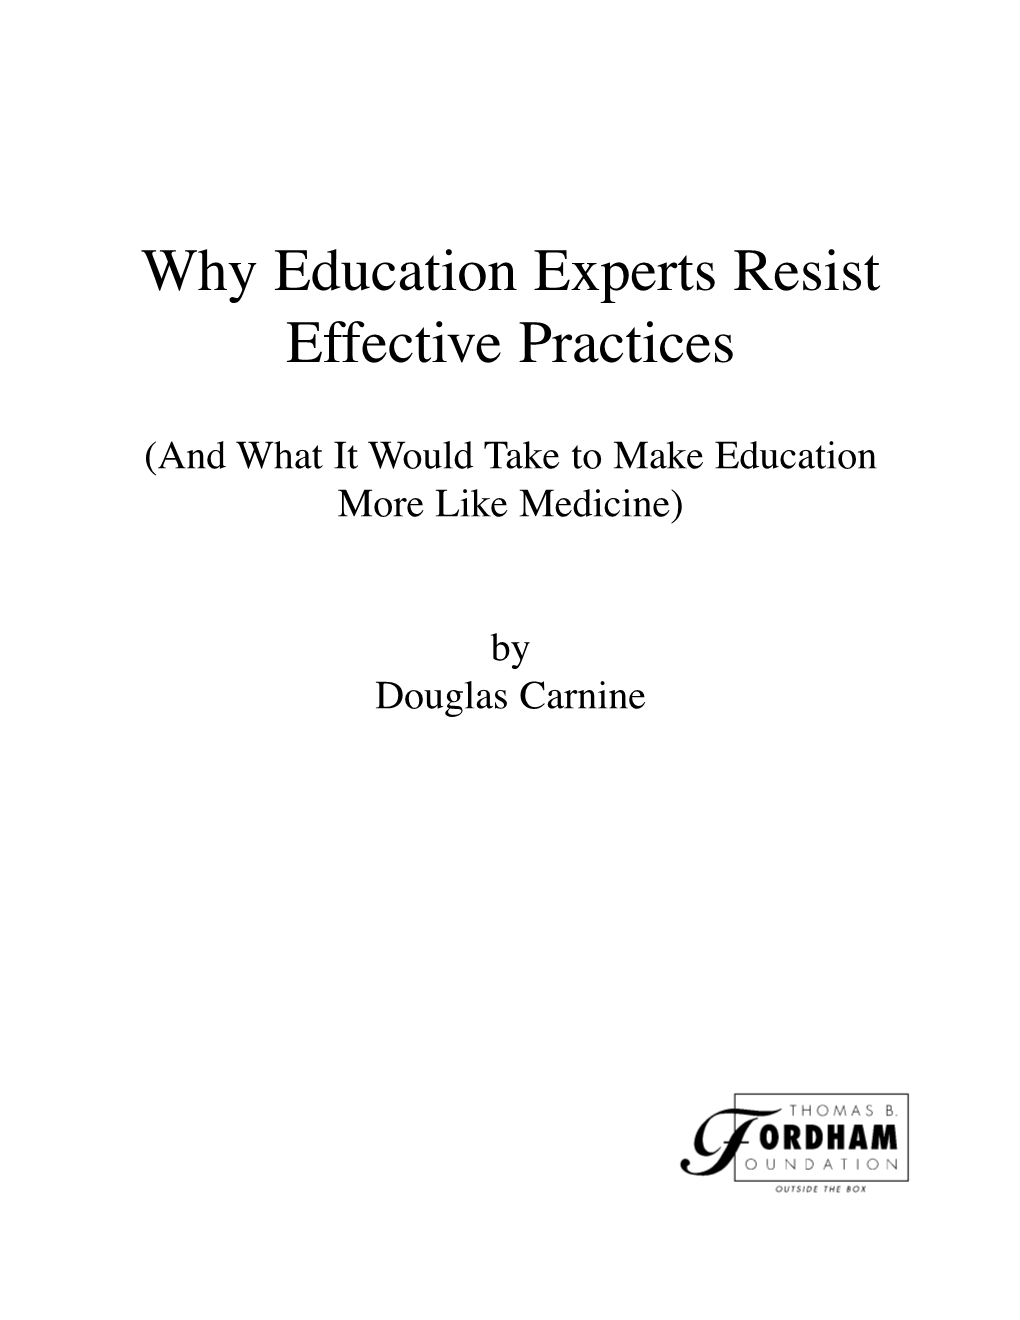 Why Education Experts Resist Effective Practices